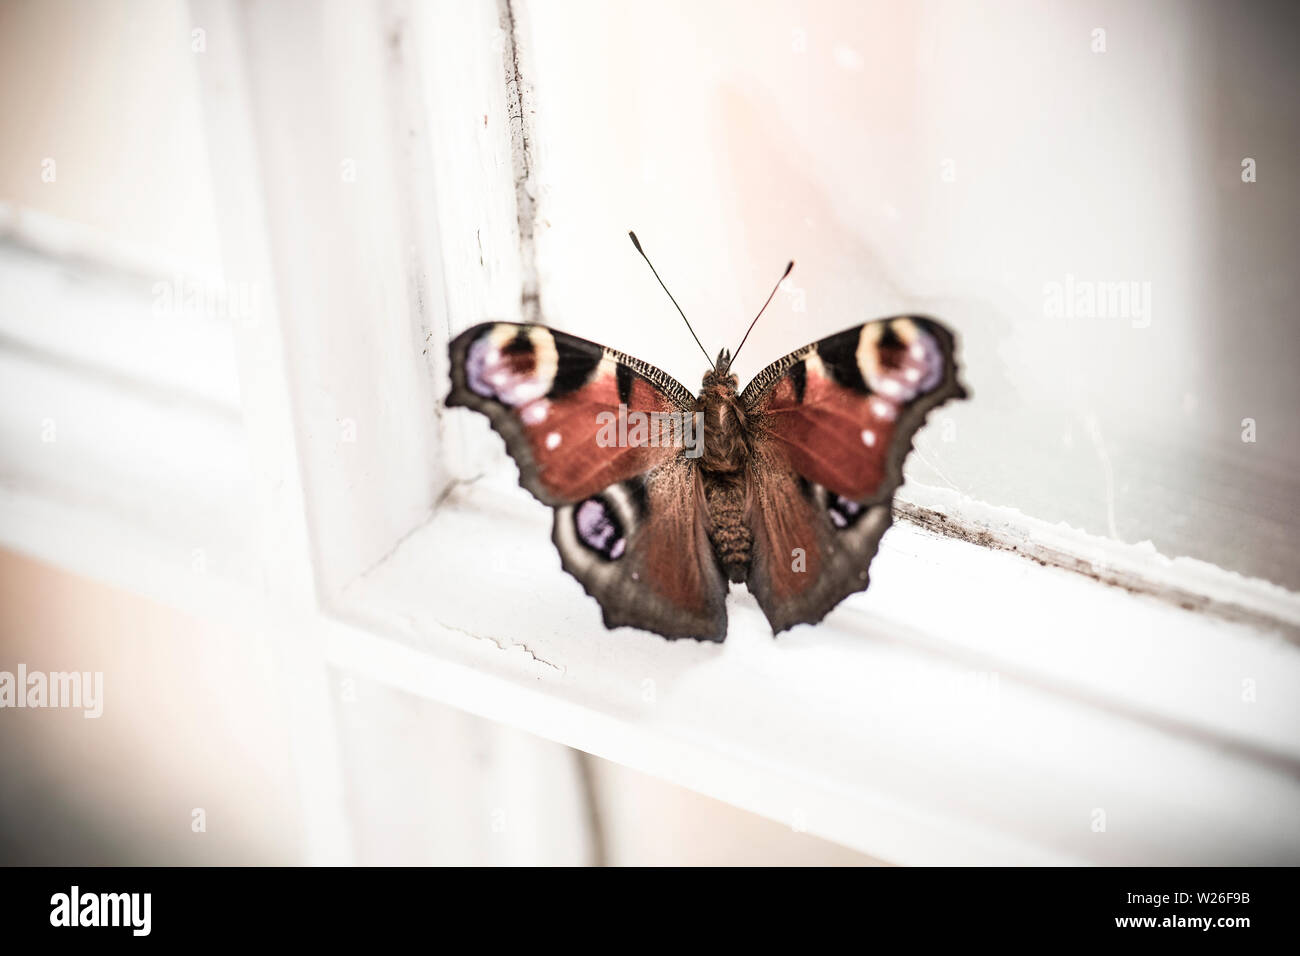 A single captive-bred Peacock butterflies, Aglais io, that has recently emerged from its chrysalis resting on a window ledge before being released. De Stock Photo